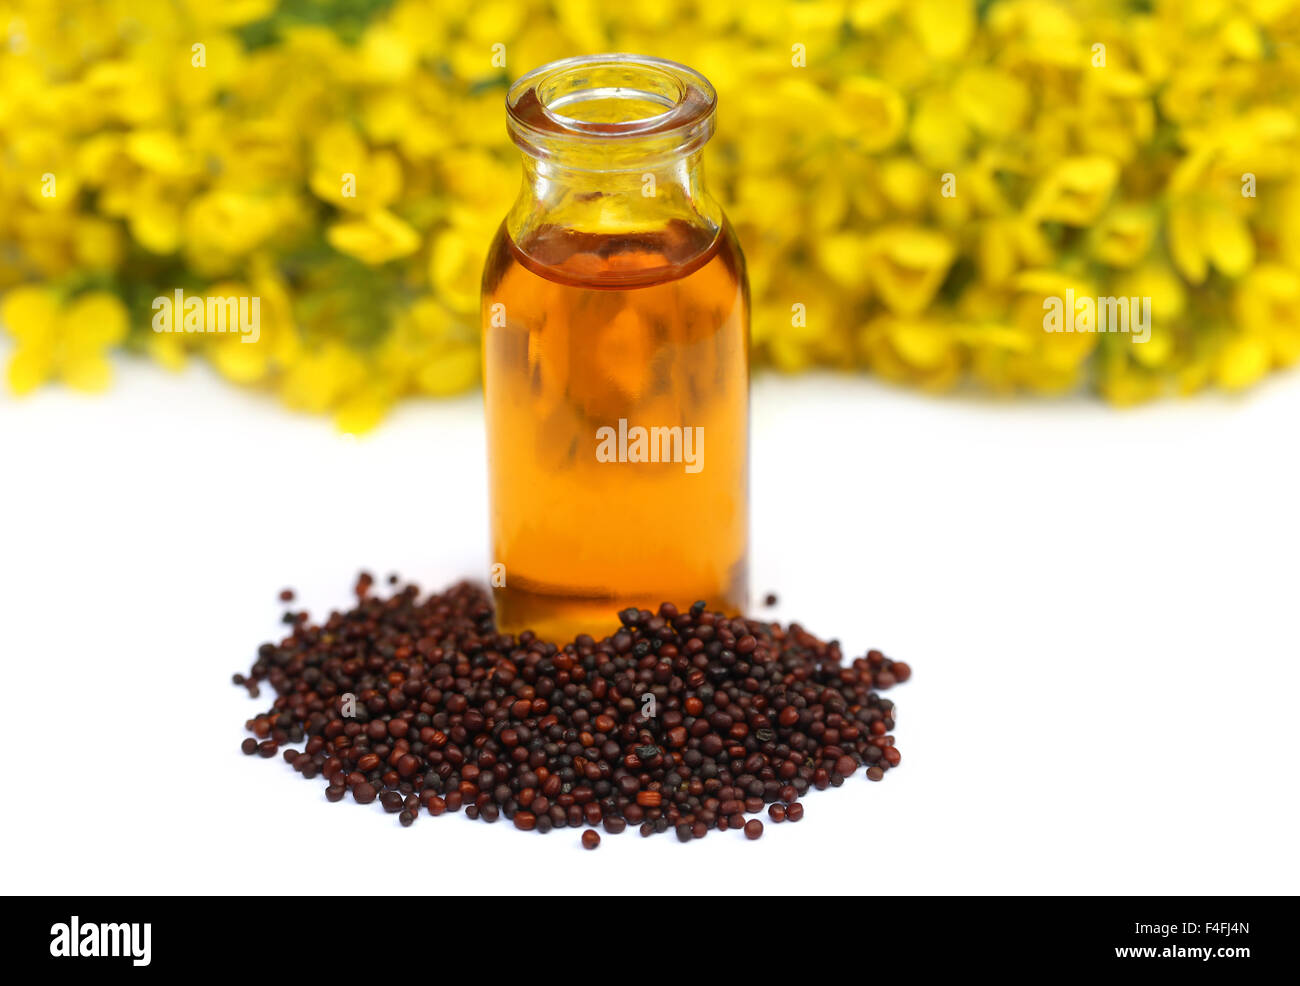 Mustard seed with oil and flower over white background Stock Photo